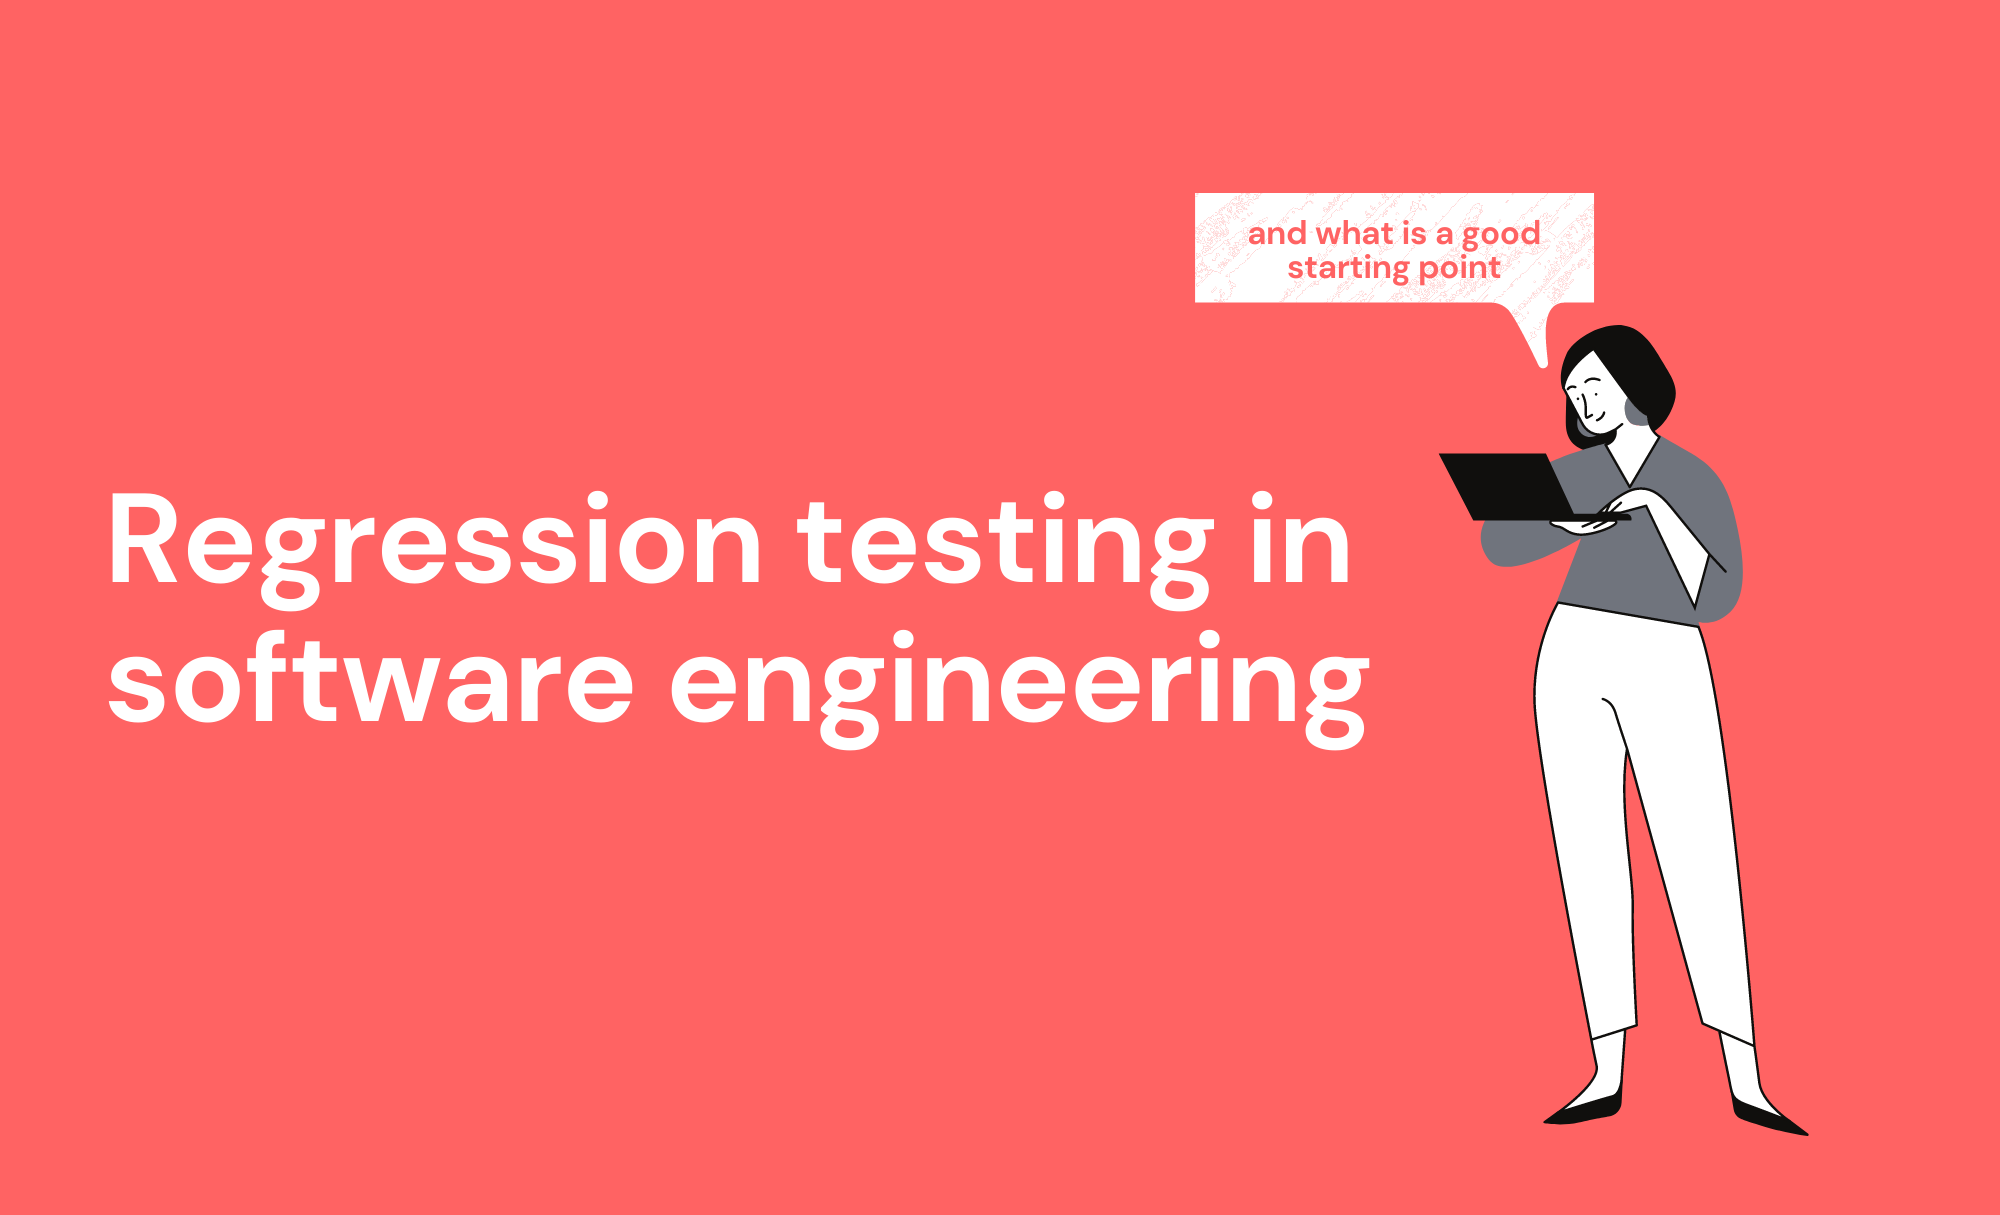 Regression testing in software engineering